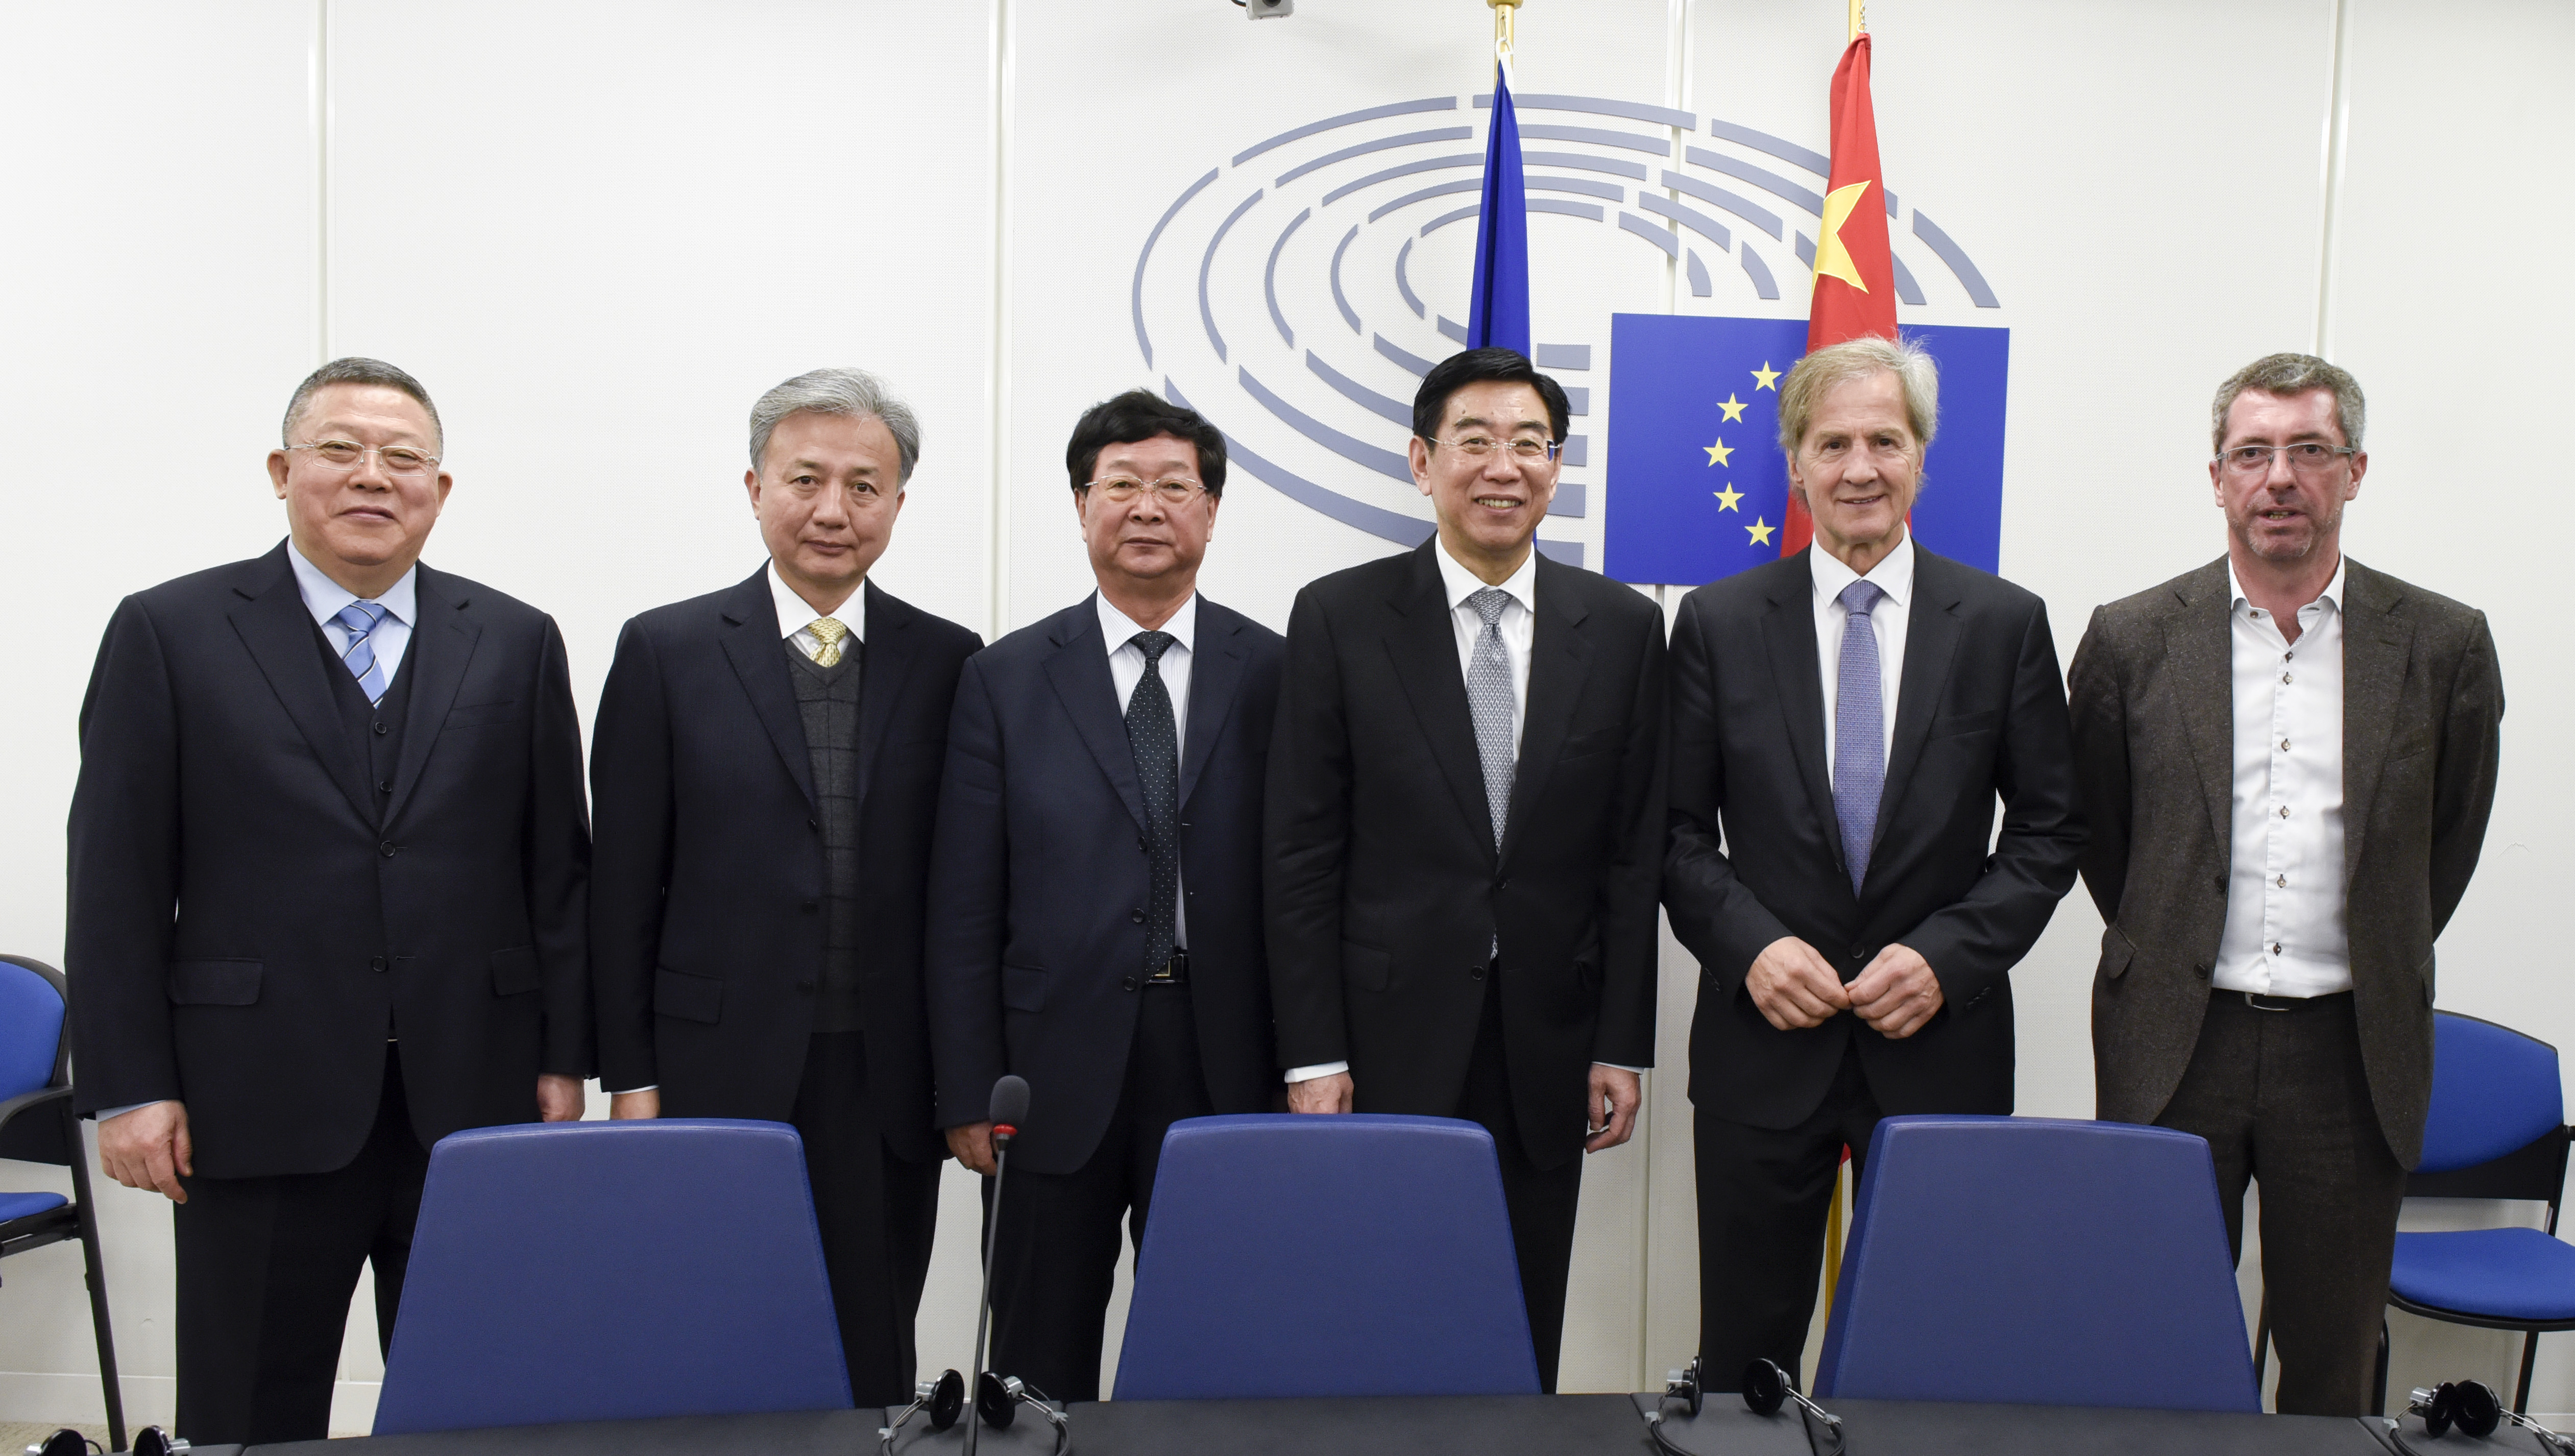 The Chinese delegation with chair of the Delegation for relations with the People's Republic of China, socialist MEP Joe Leinen at the European Parliament on November 15 